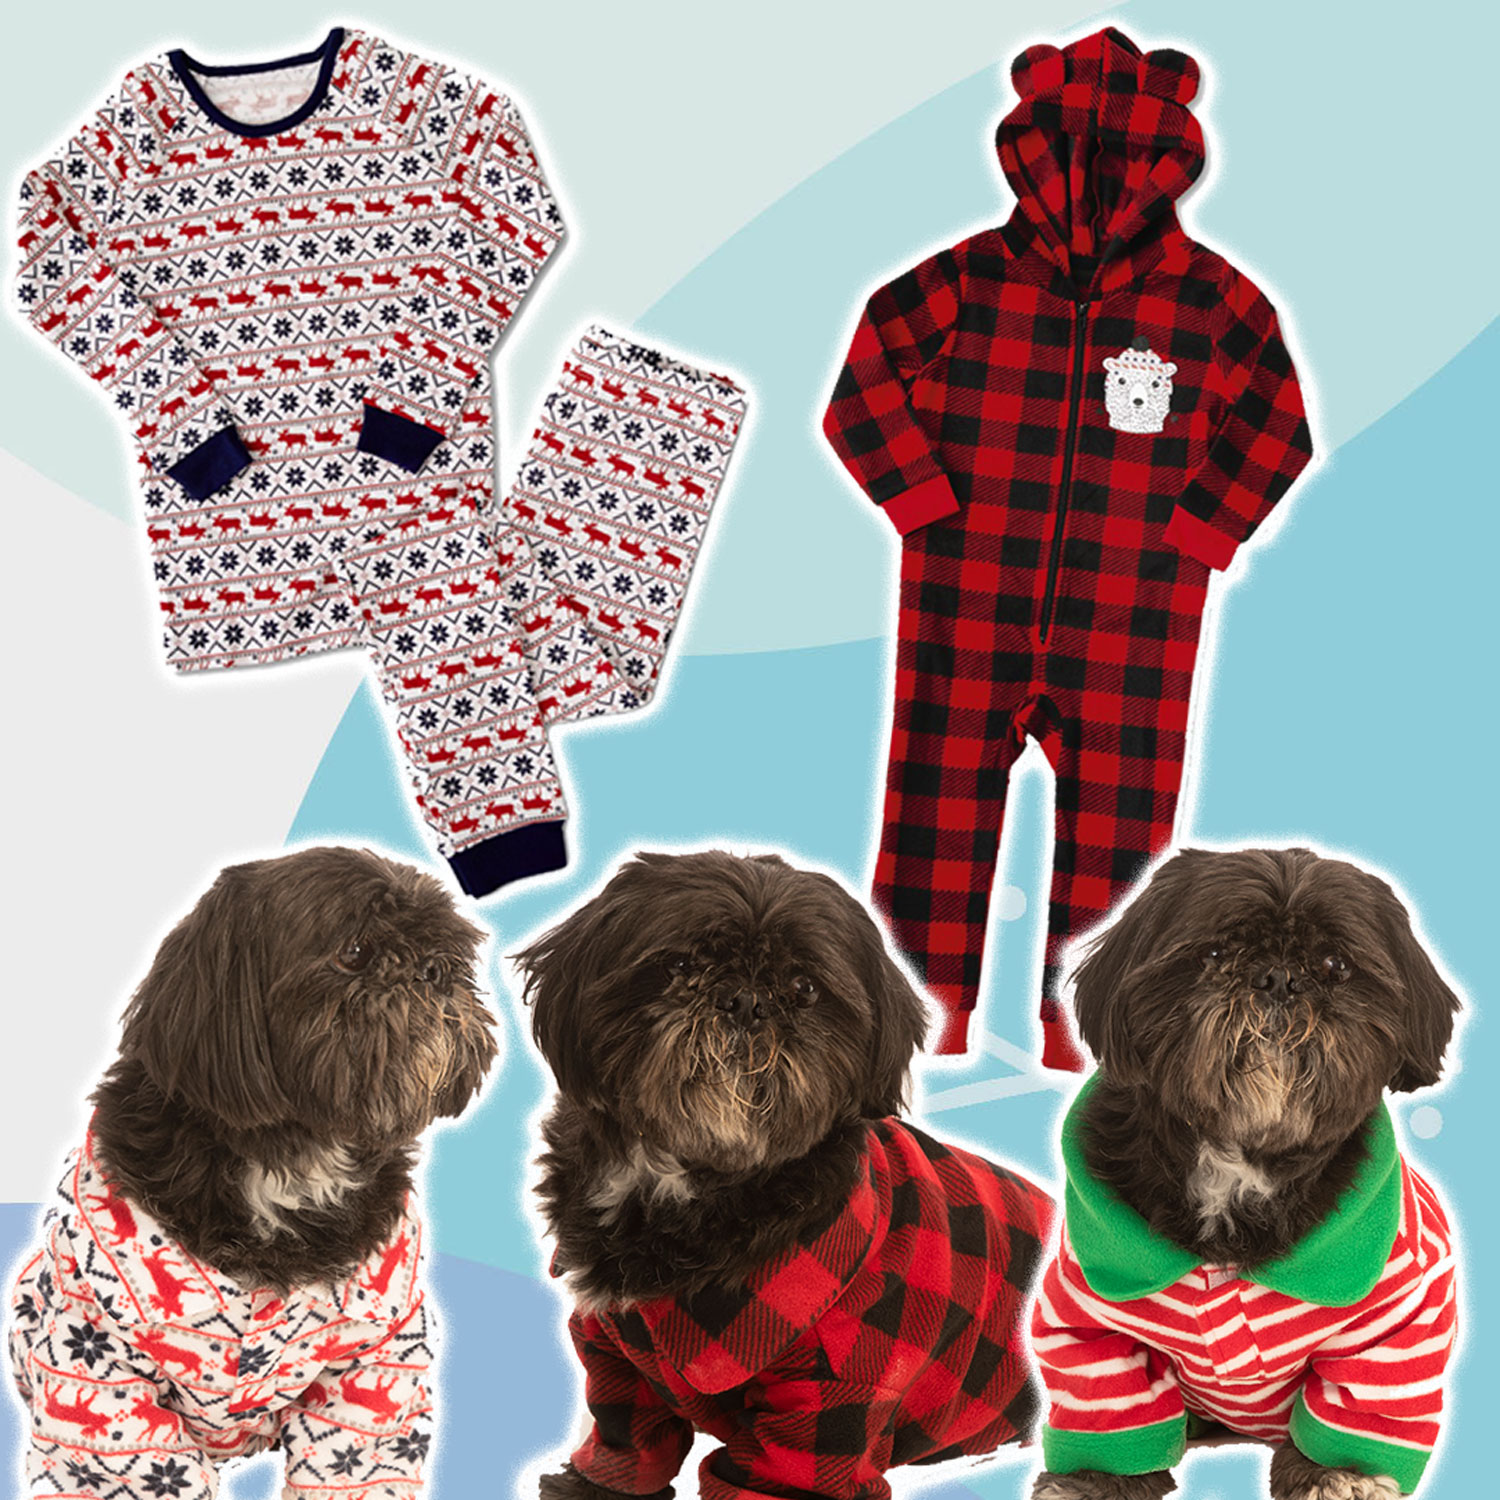 Aldi Is Selling Matching Holiday Pajamas for You and Your Pet—and